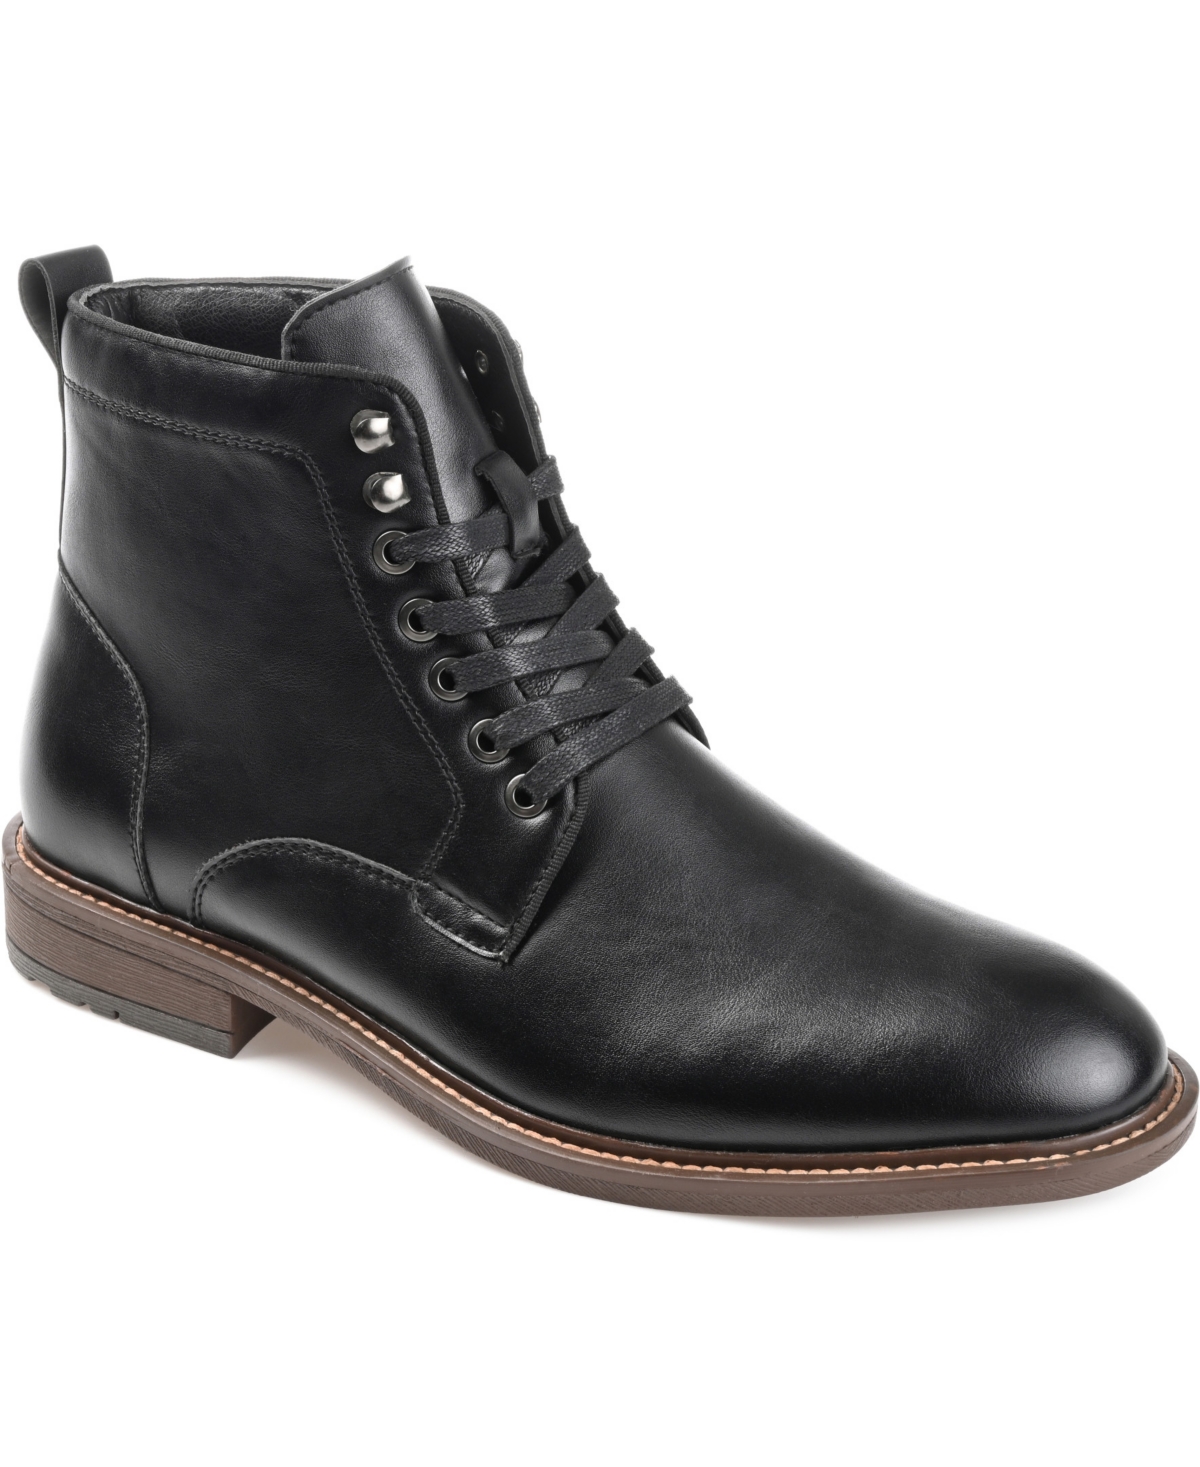 Men's Langford Ankle Boots - Brown